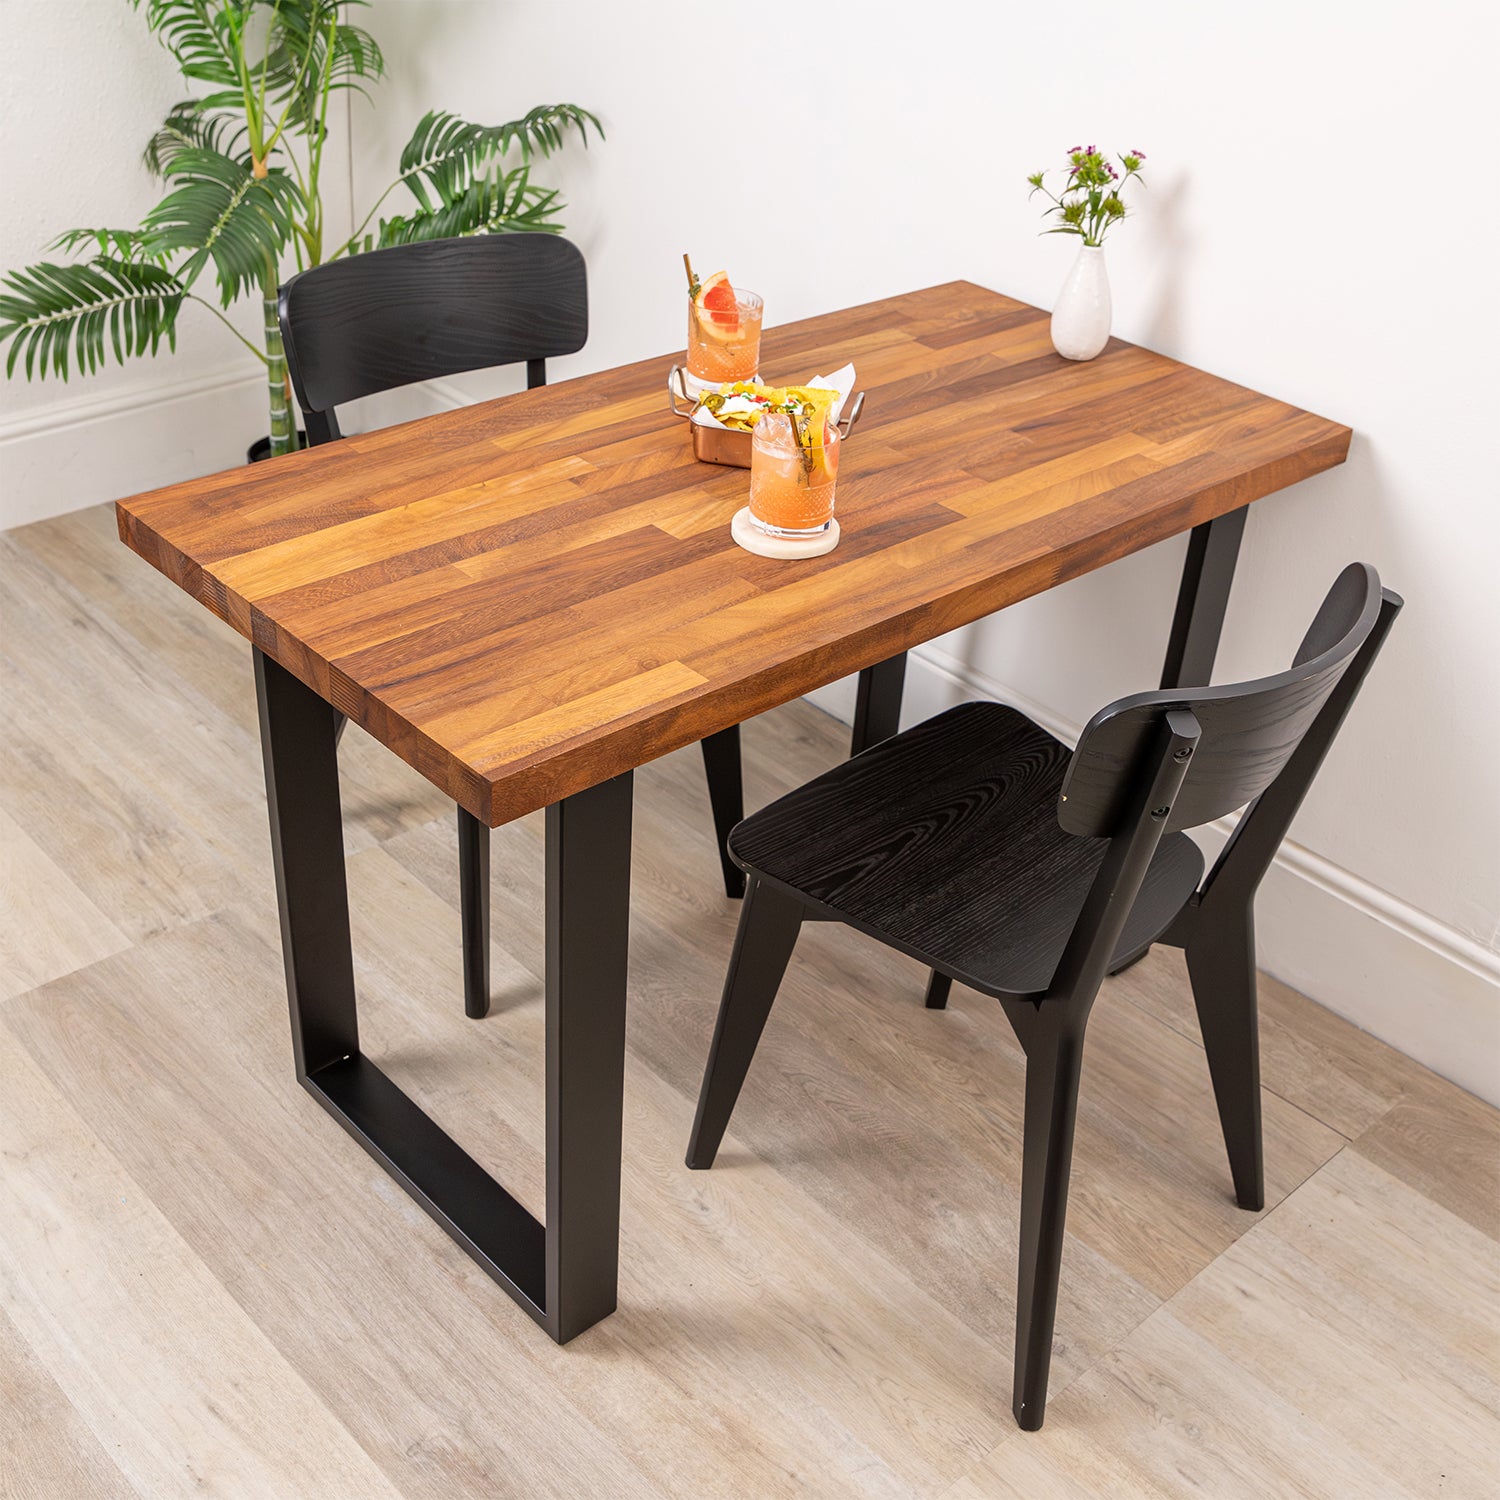 Iroko Solid Wood Table with Square Metal Legs